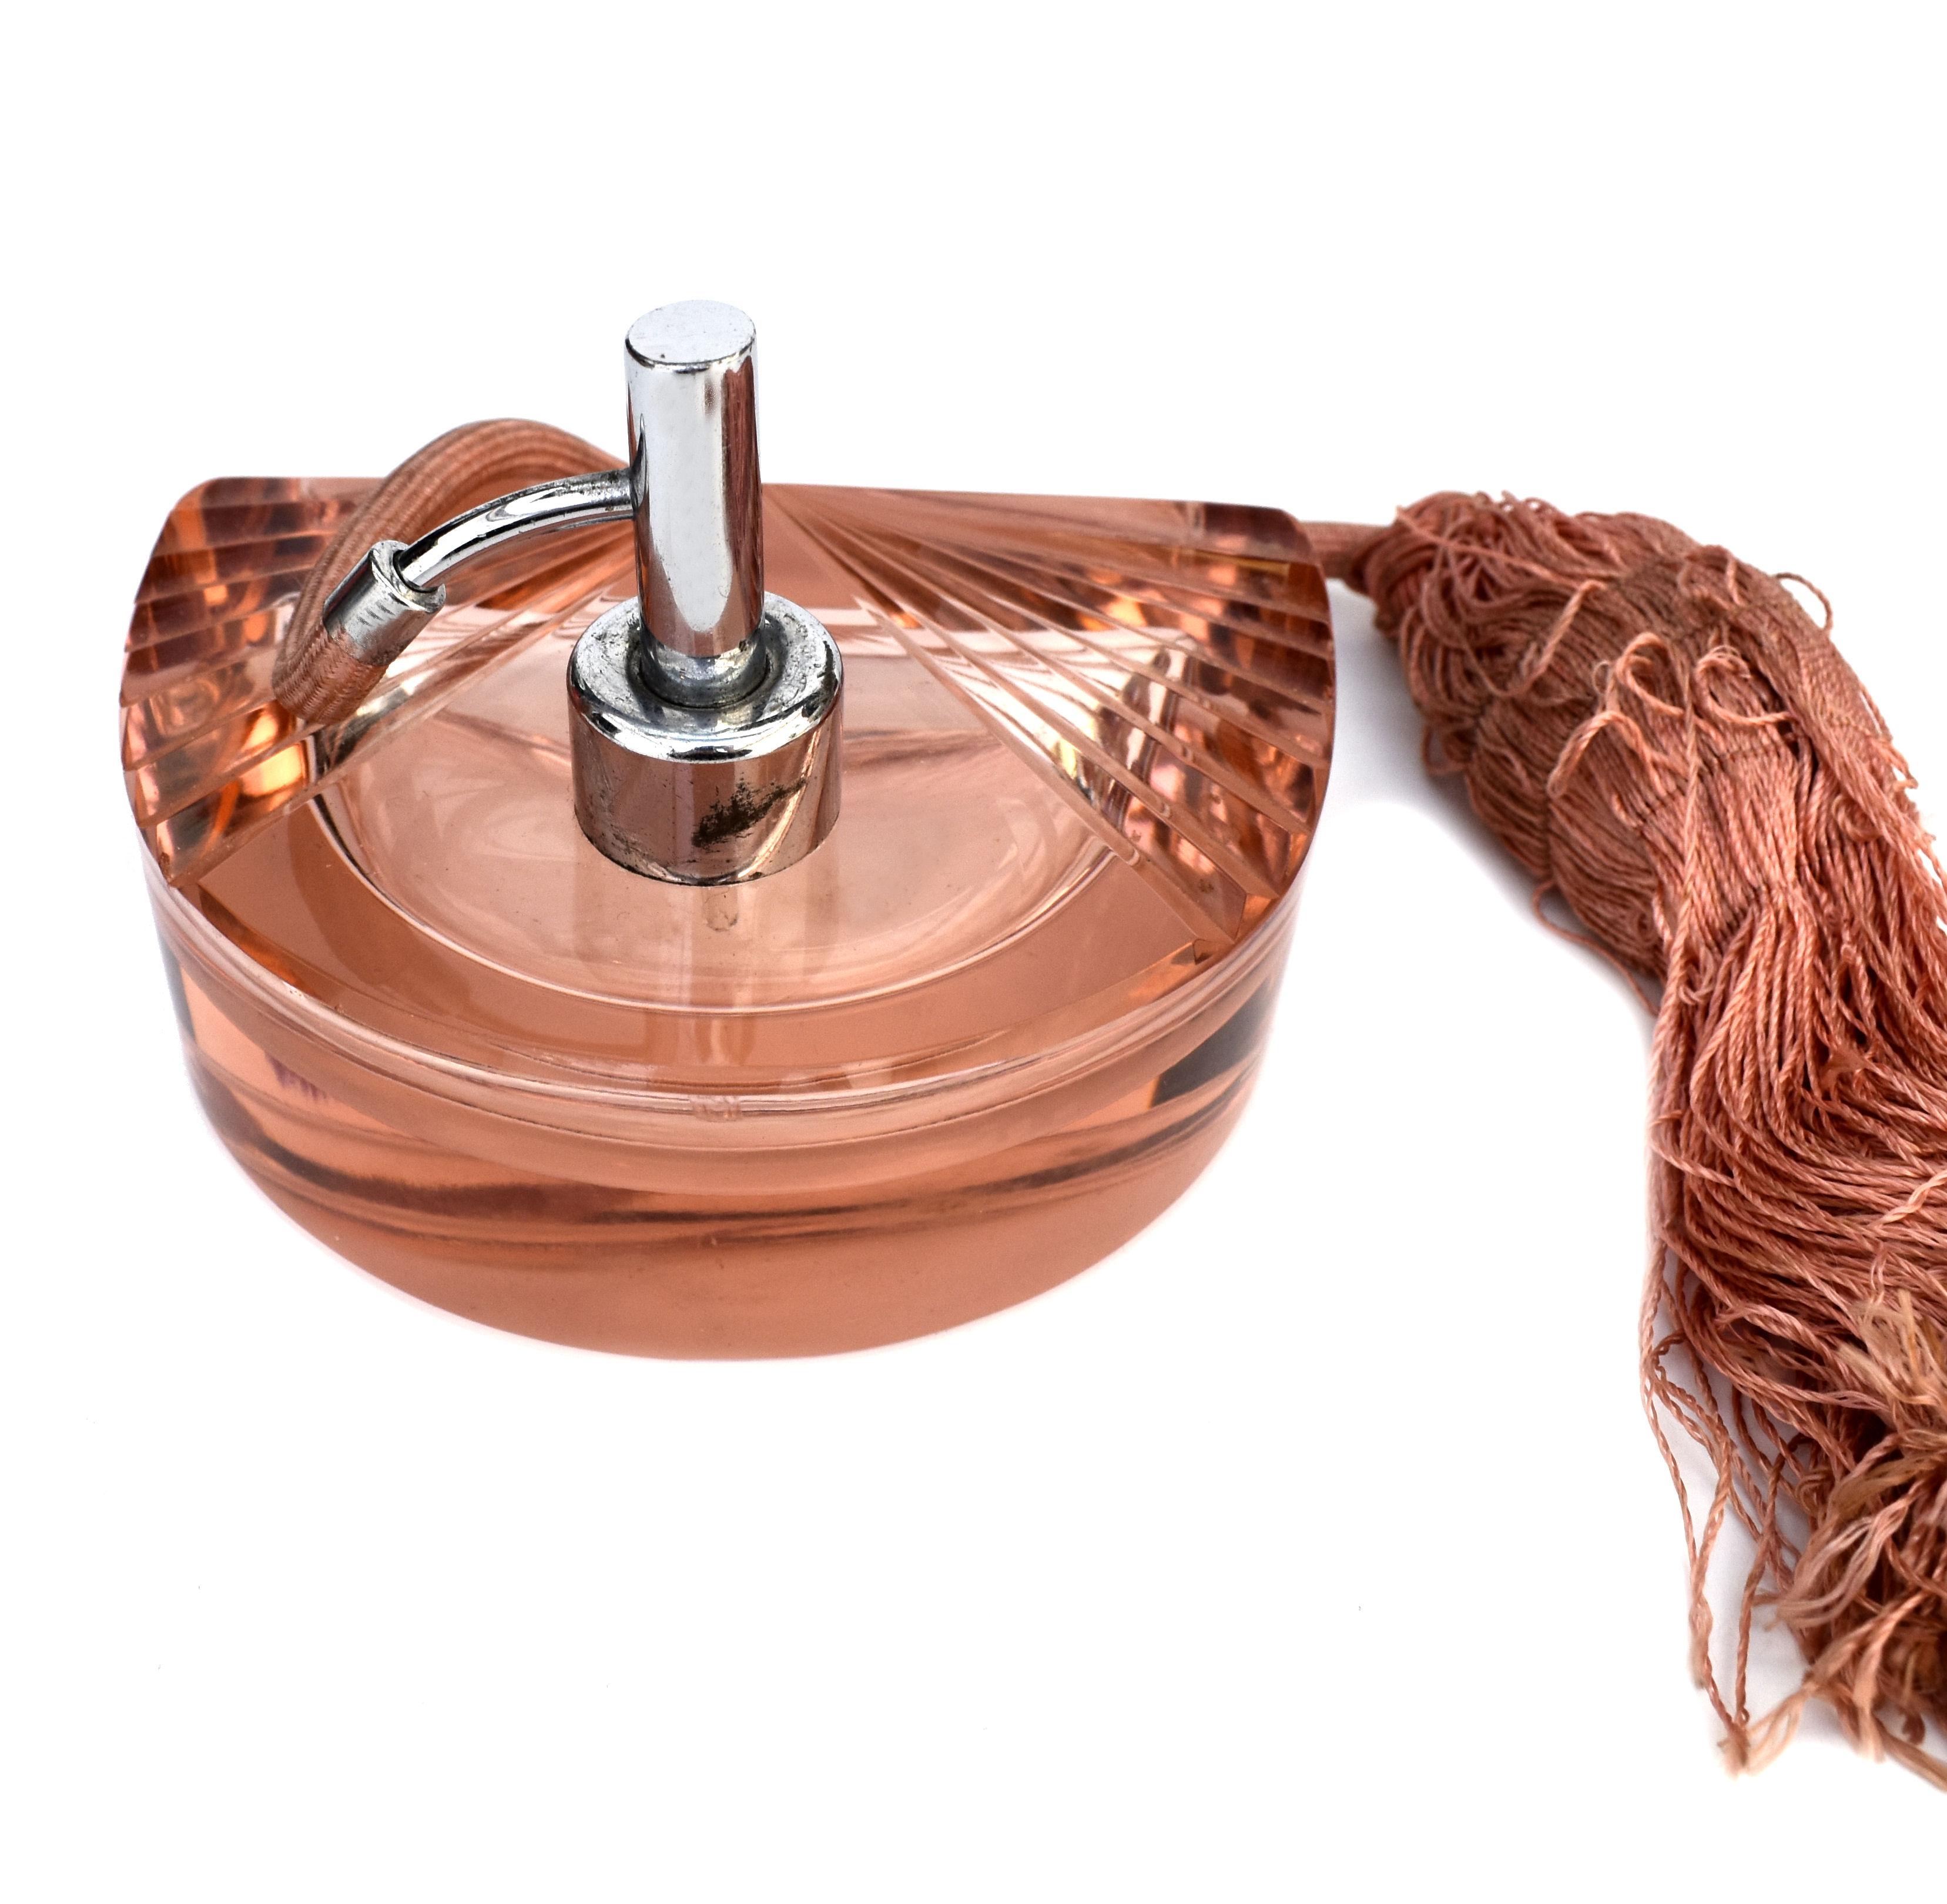 For your consideration is this beautiful and very unusual shaped Ladies perfume atomizer. Made from cut glass in a peachy pink tone, the body is cut to create a fan shape. The chrome sprayer has it's original silk tassel and bulb. This is a good